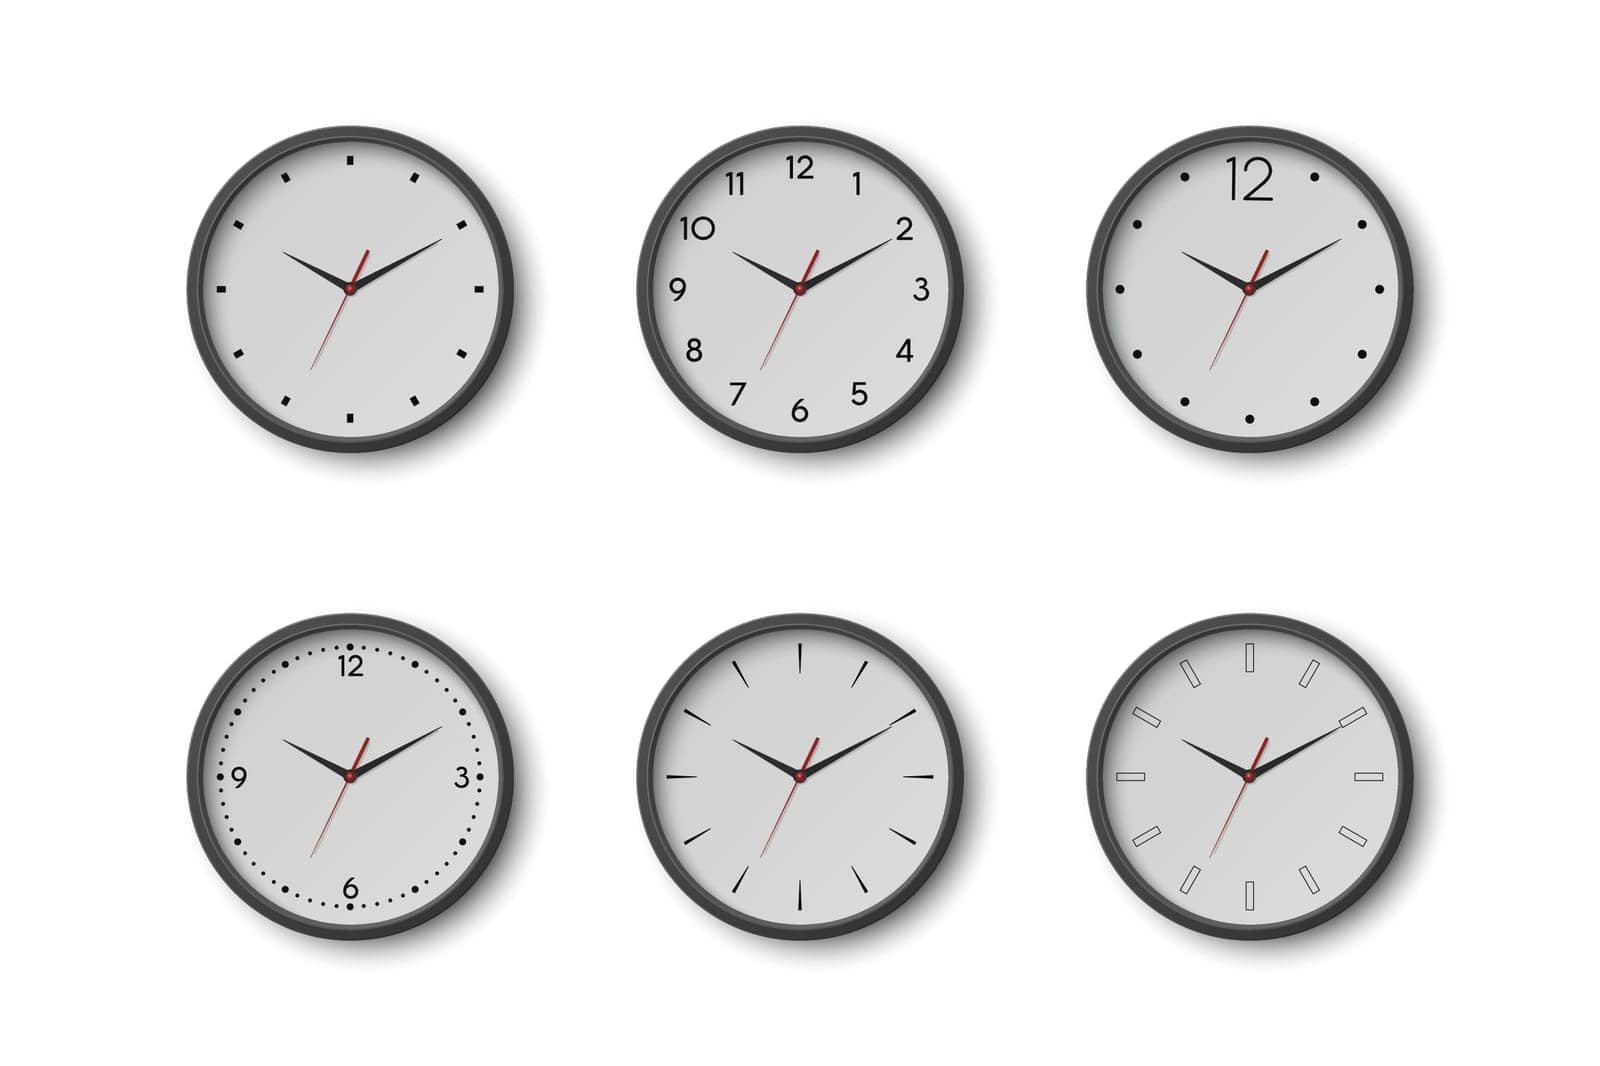 Vector 3d Round Wall Office Clock with White Clock Dial Set Closeup Isolated. Watches, Design Template, Mock-up for Branding, Advertise. Vector Simple Minimalistic Clocks, Watches in Front View.